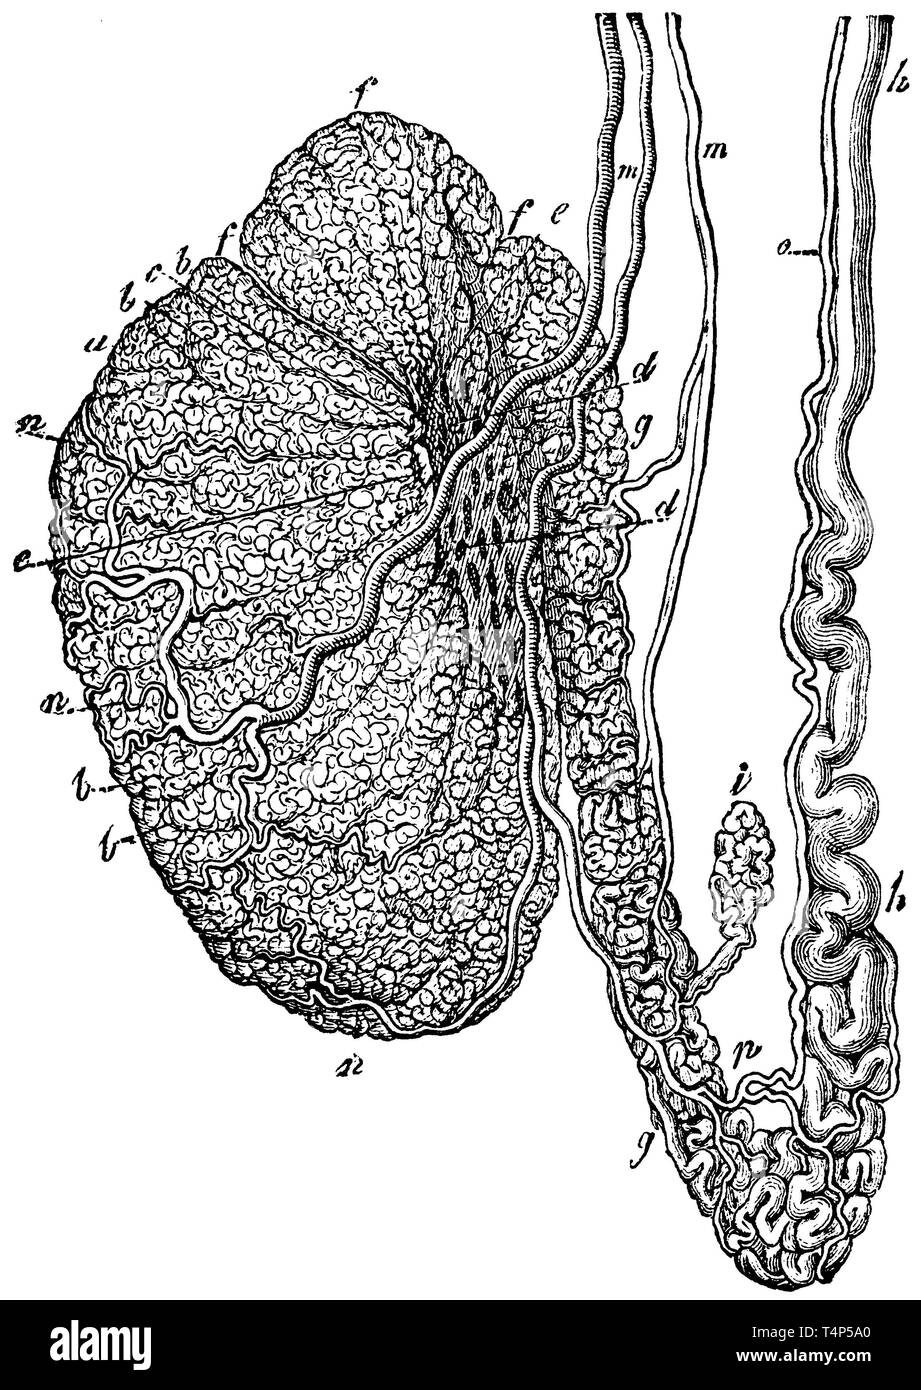 Testes a) Testicles, b) Lappets, c, e) Common tubules, g) Vine testicles, m, o, p) Blood vessels, h) Seed gland, anonym  1887 Stock Photo